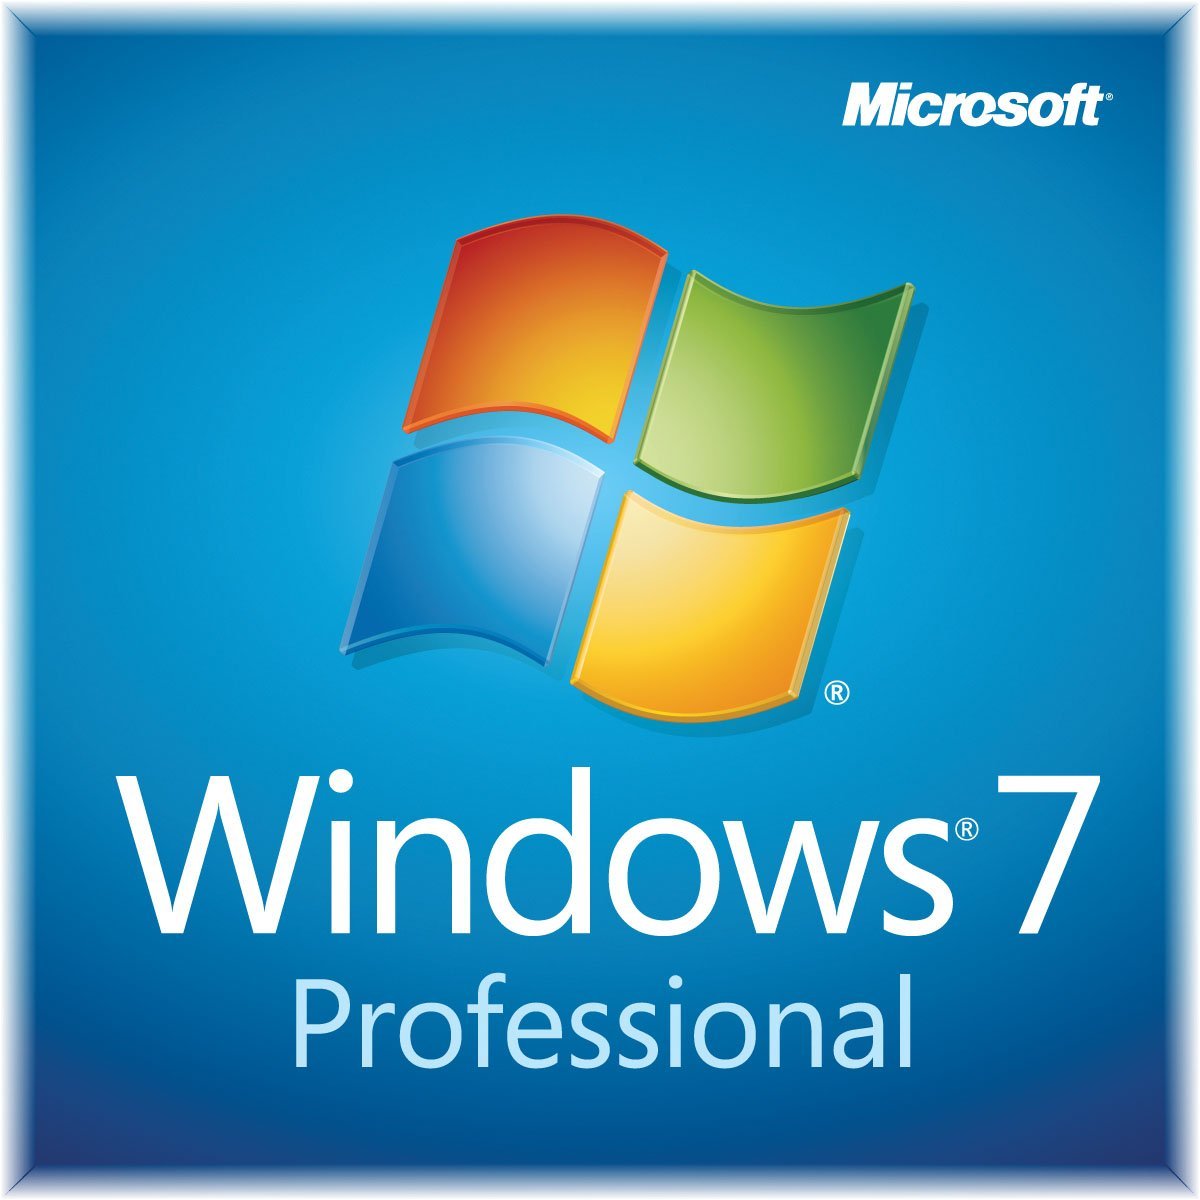 windows 7 service pack 2 iso image download